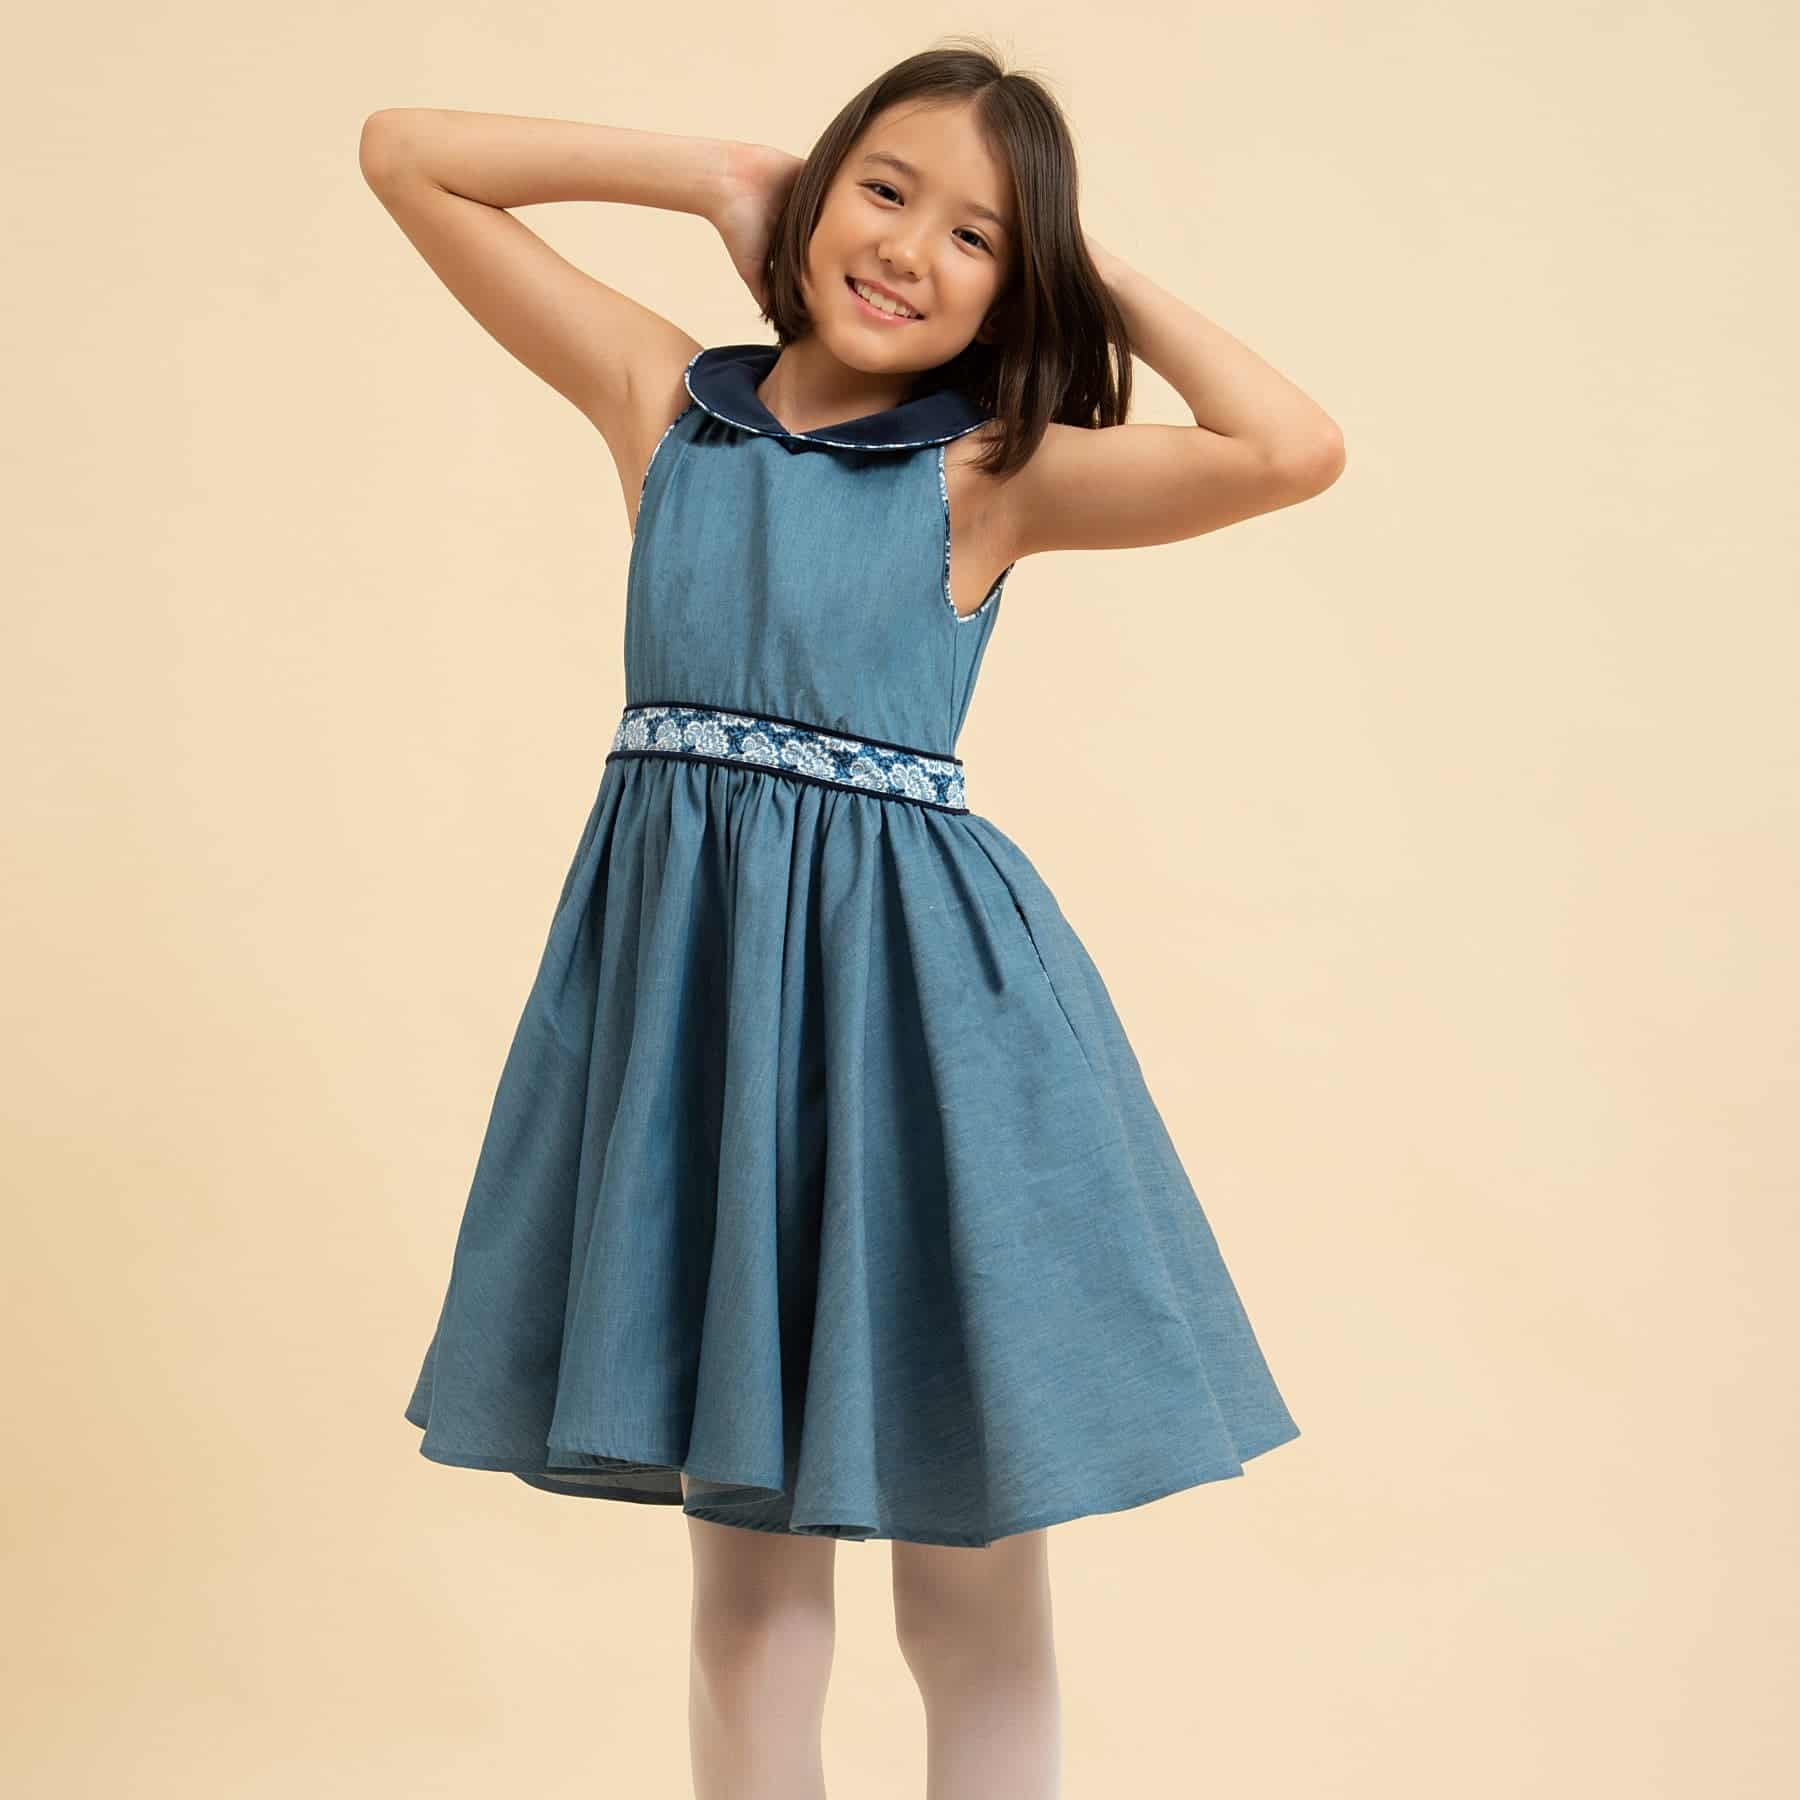 Dress that turns blue denim for girls with. a navy blue velvet Claudine collar from the children's fashion brand la faute a voltaire